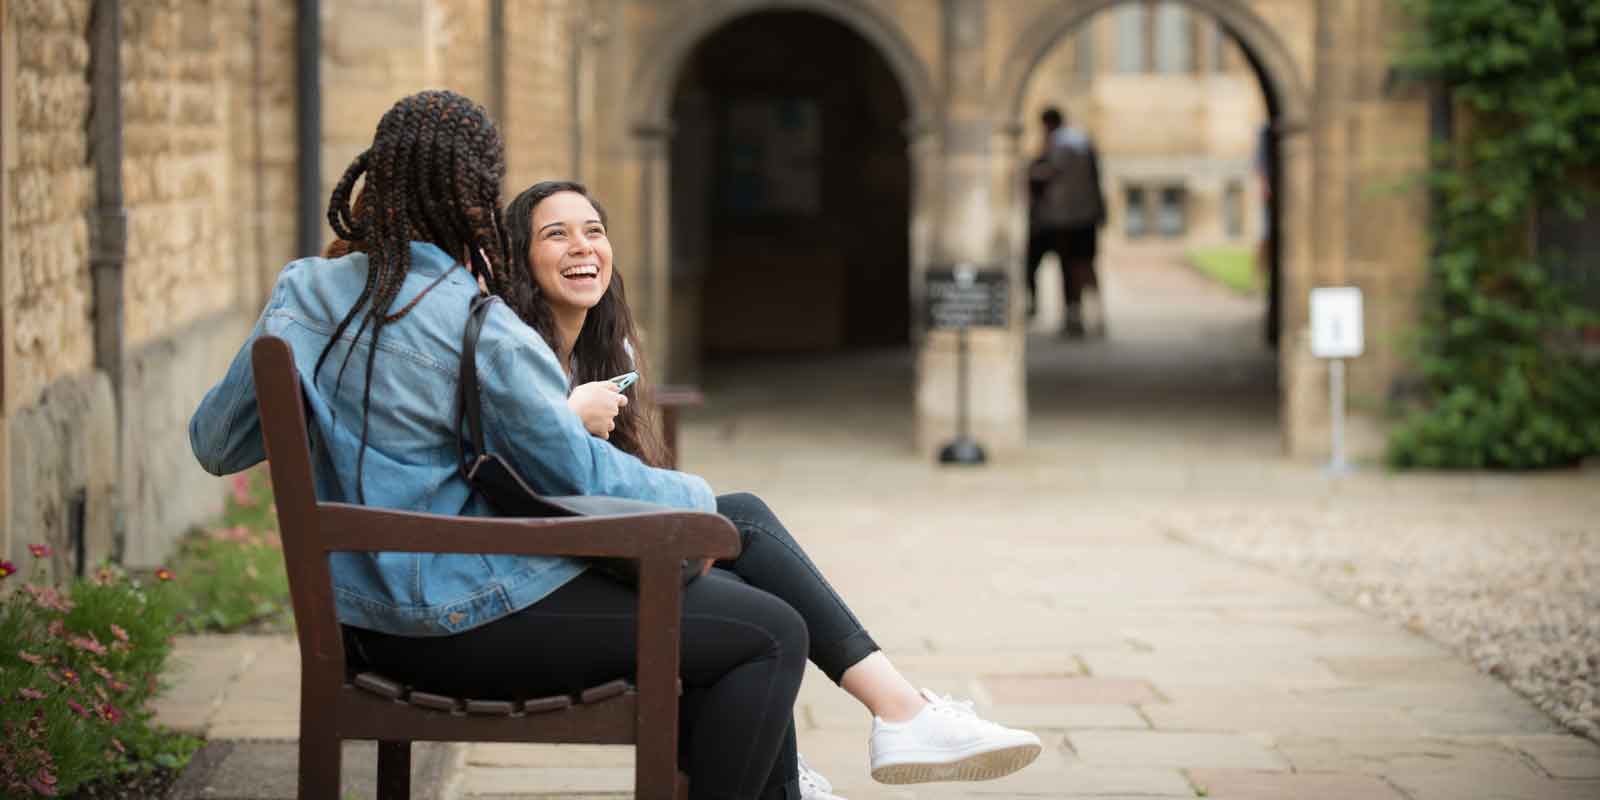 Girls talking on bench in Oxford